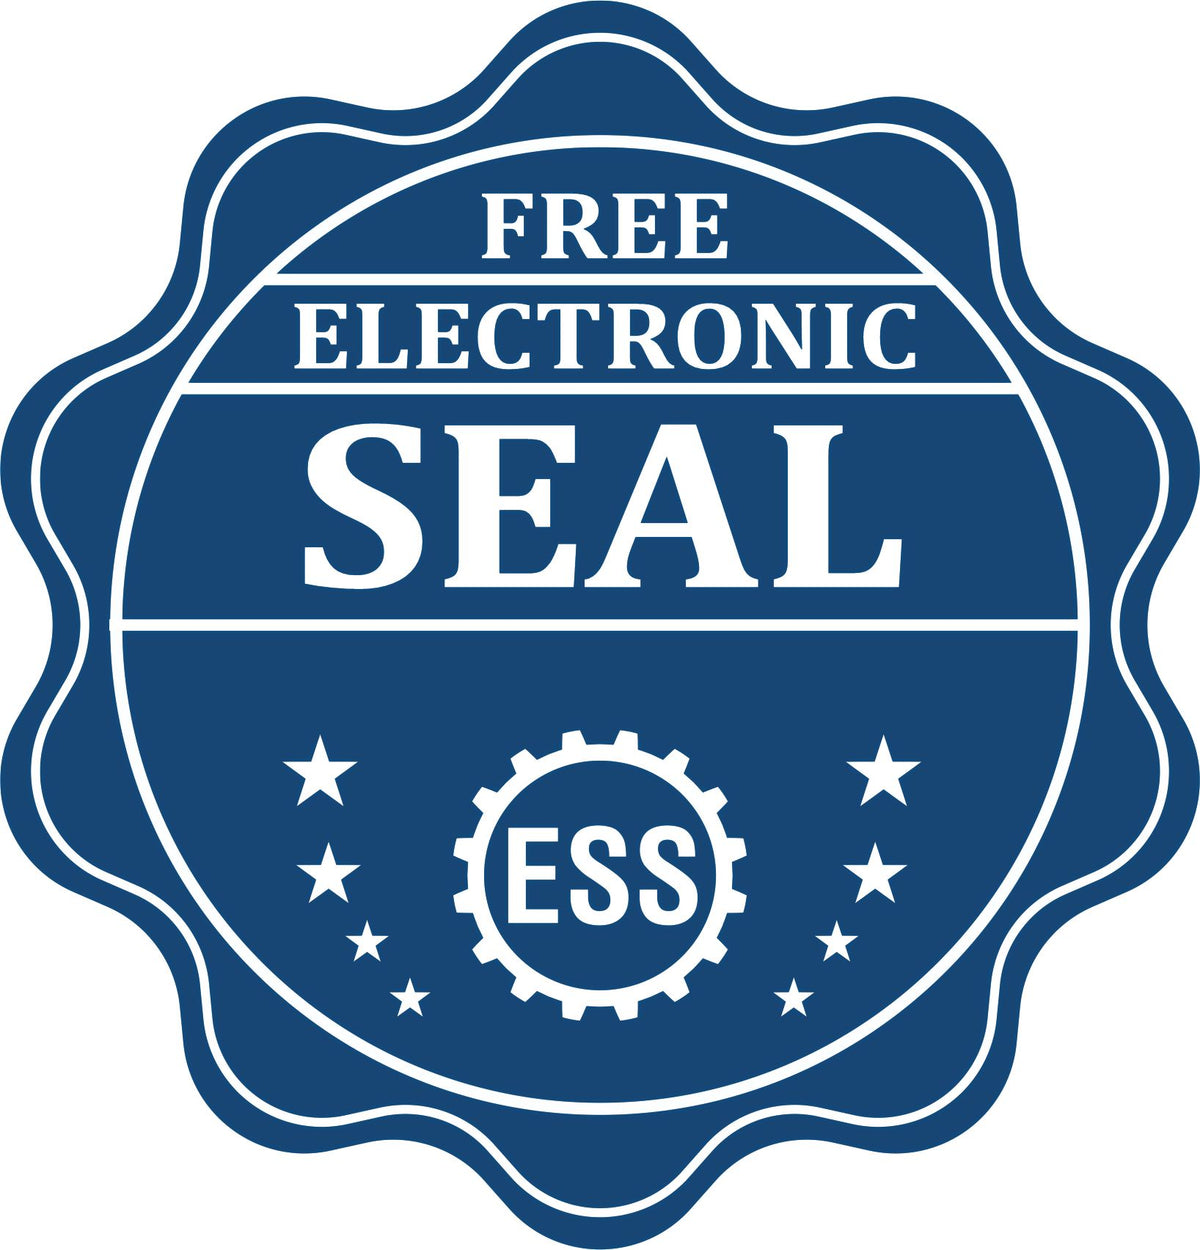 A badge showing a free electronic seal for the Oklahoma Engineer Desk Seal with stars and the ESS gear on the emblem.